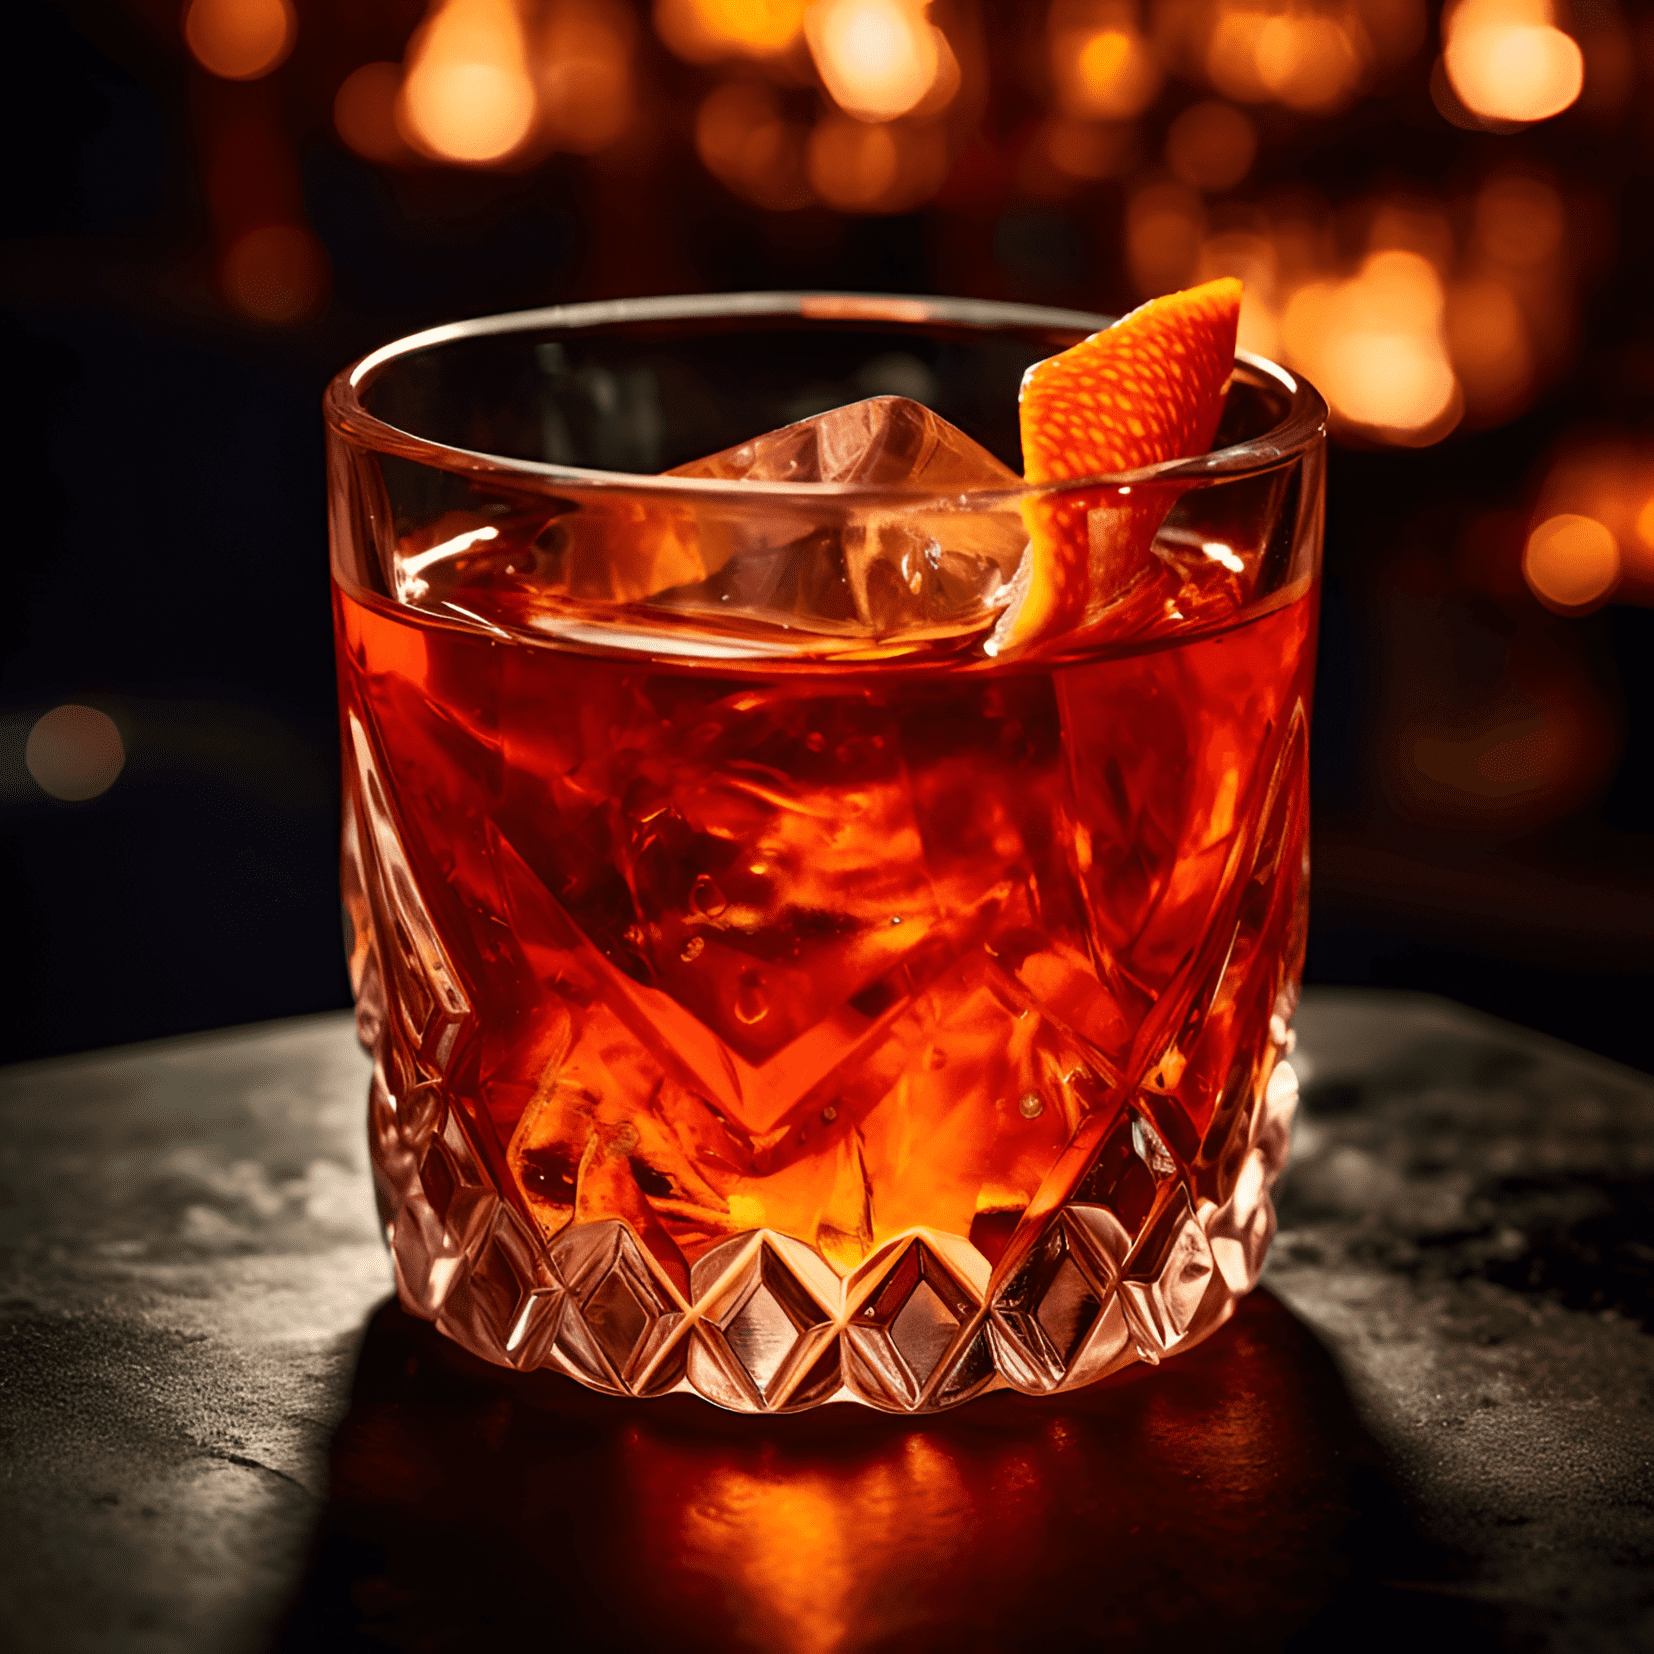 Hellfire Cocktail Recipe - The Hellfire cocktail is a spicy, smoky, and intense drink with a hint of sweetness. The heat from the chili peppers is balanced by the smokiness of the mezcal and the sweetness of the agave syrup, creating a complex and intriguing flavor profile.